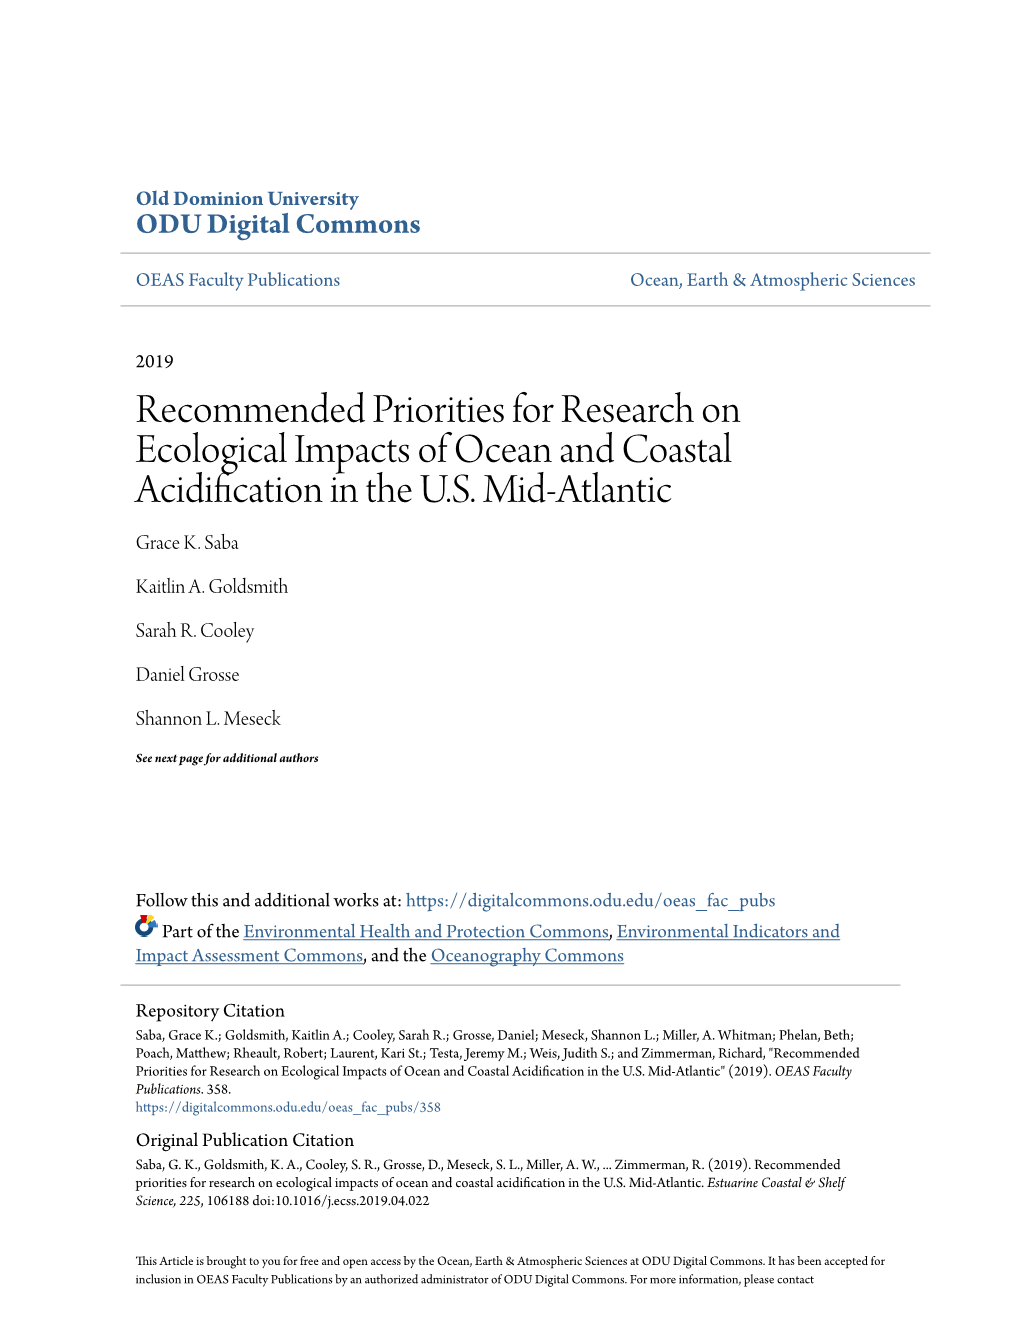 Recommended Priorities for Research on Ecological Impacts of Ocean and Coastal Acidification in the U.S. Mid-Atlantic Grace K